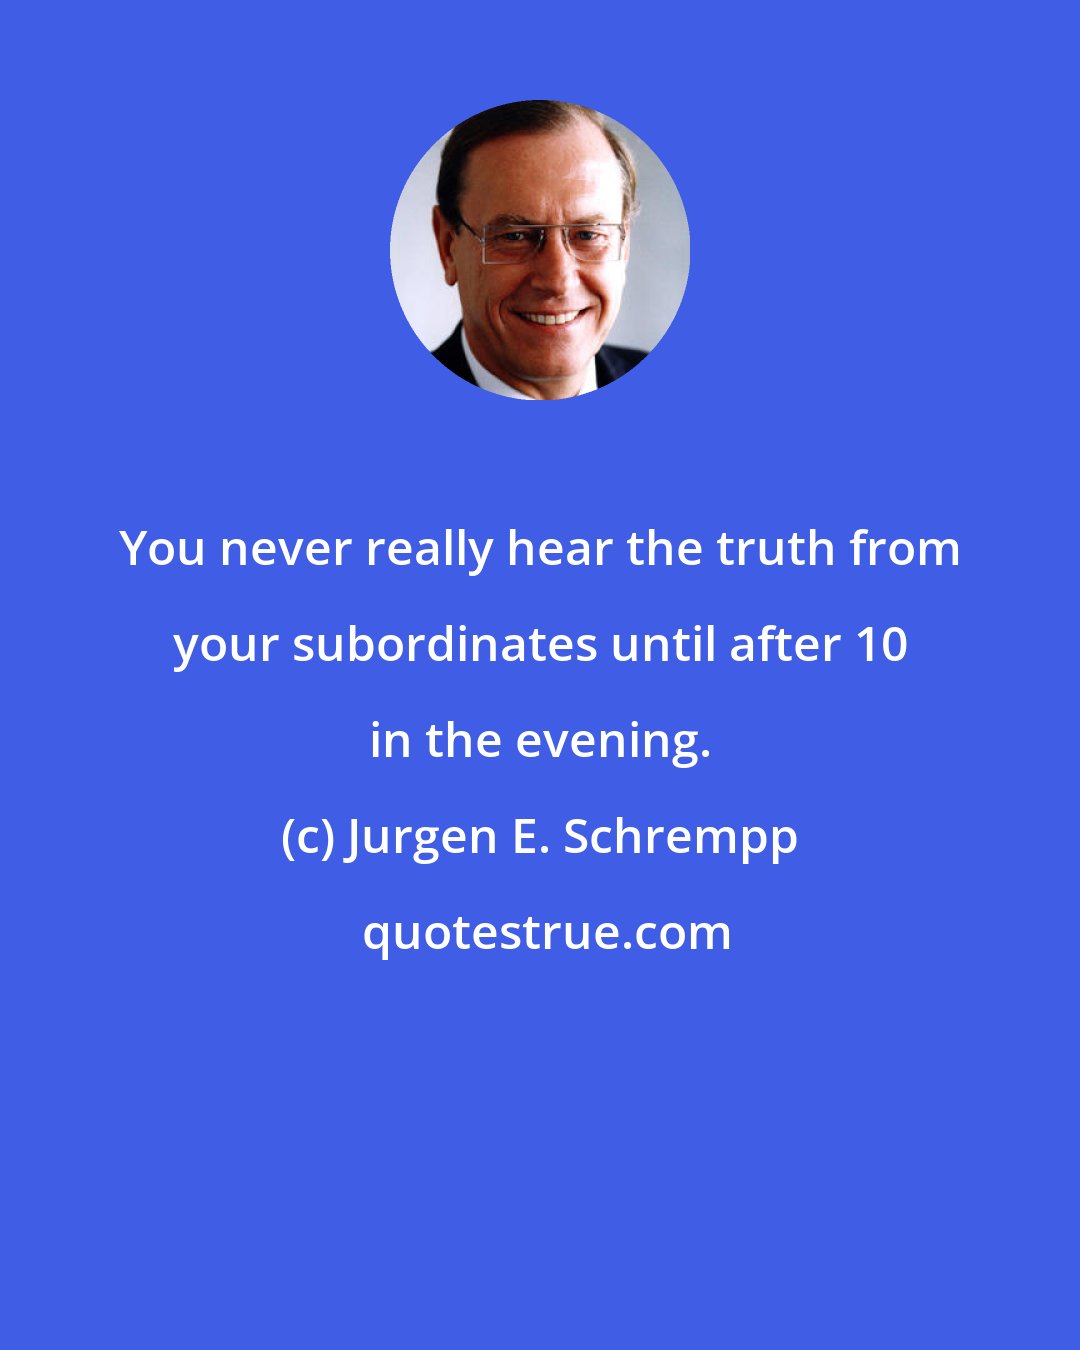 Jurgen E. Schrempp: You never really hear the truth from your subordinates until after 10 in the evening.